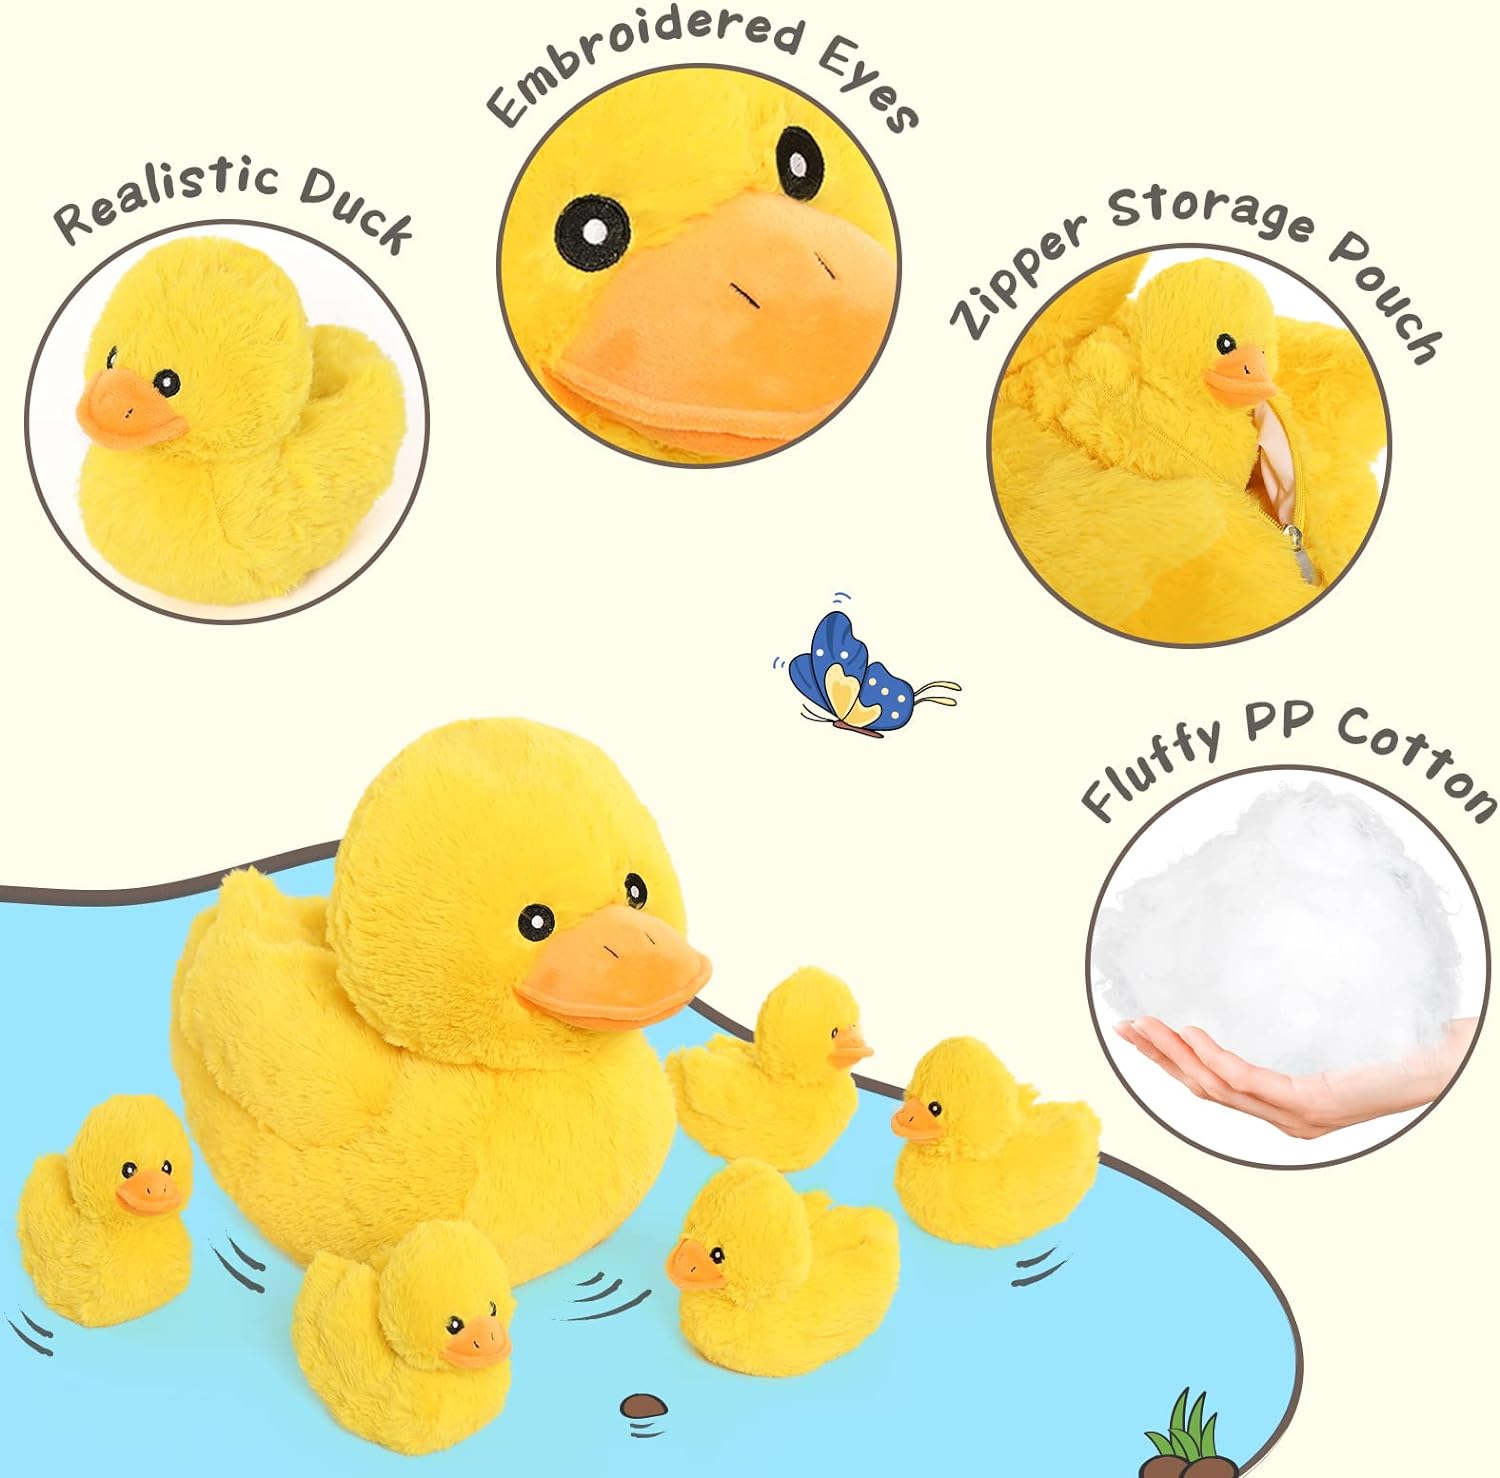 Duck Stuffed Animals Duckling Plush Toys, Yellow, 16 Inches